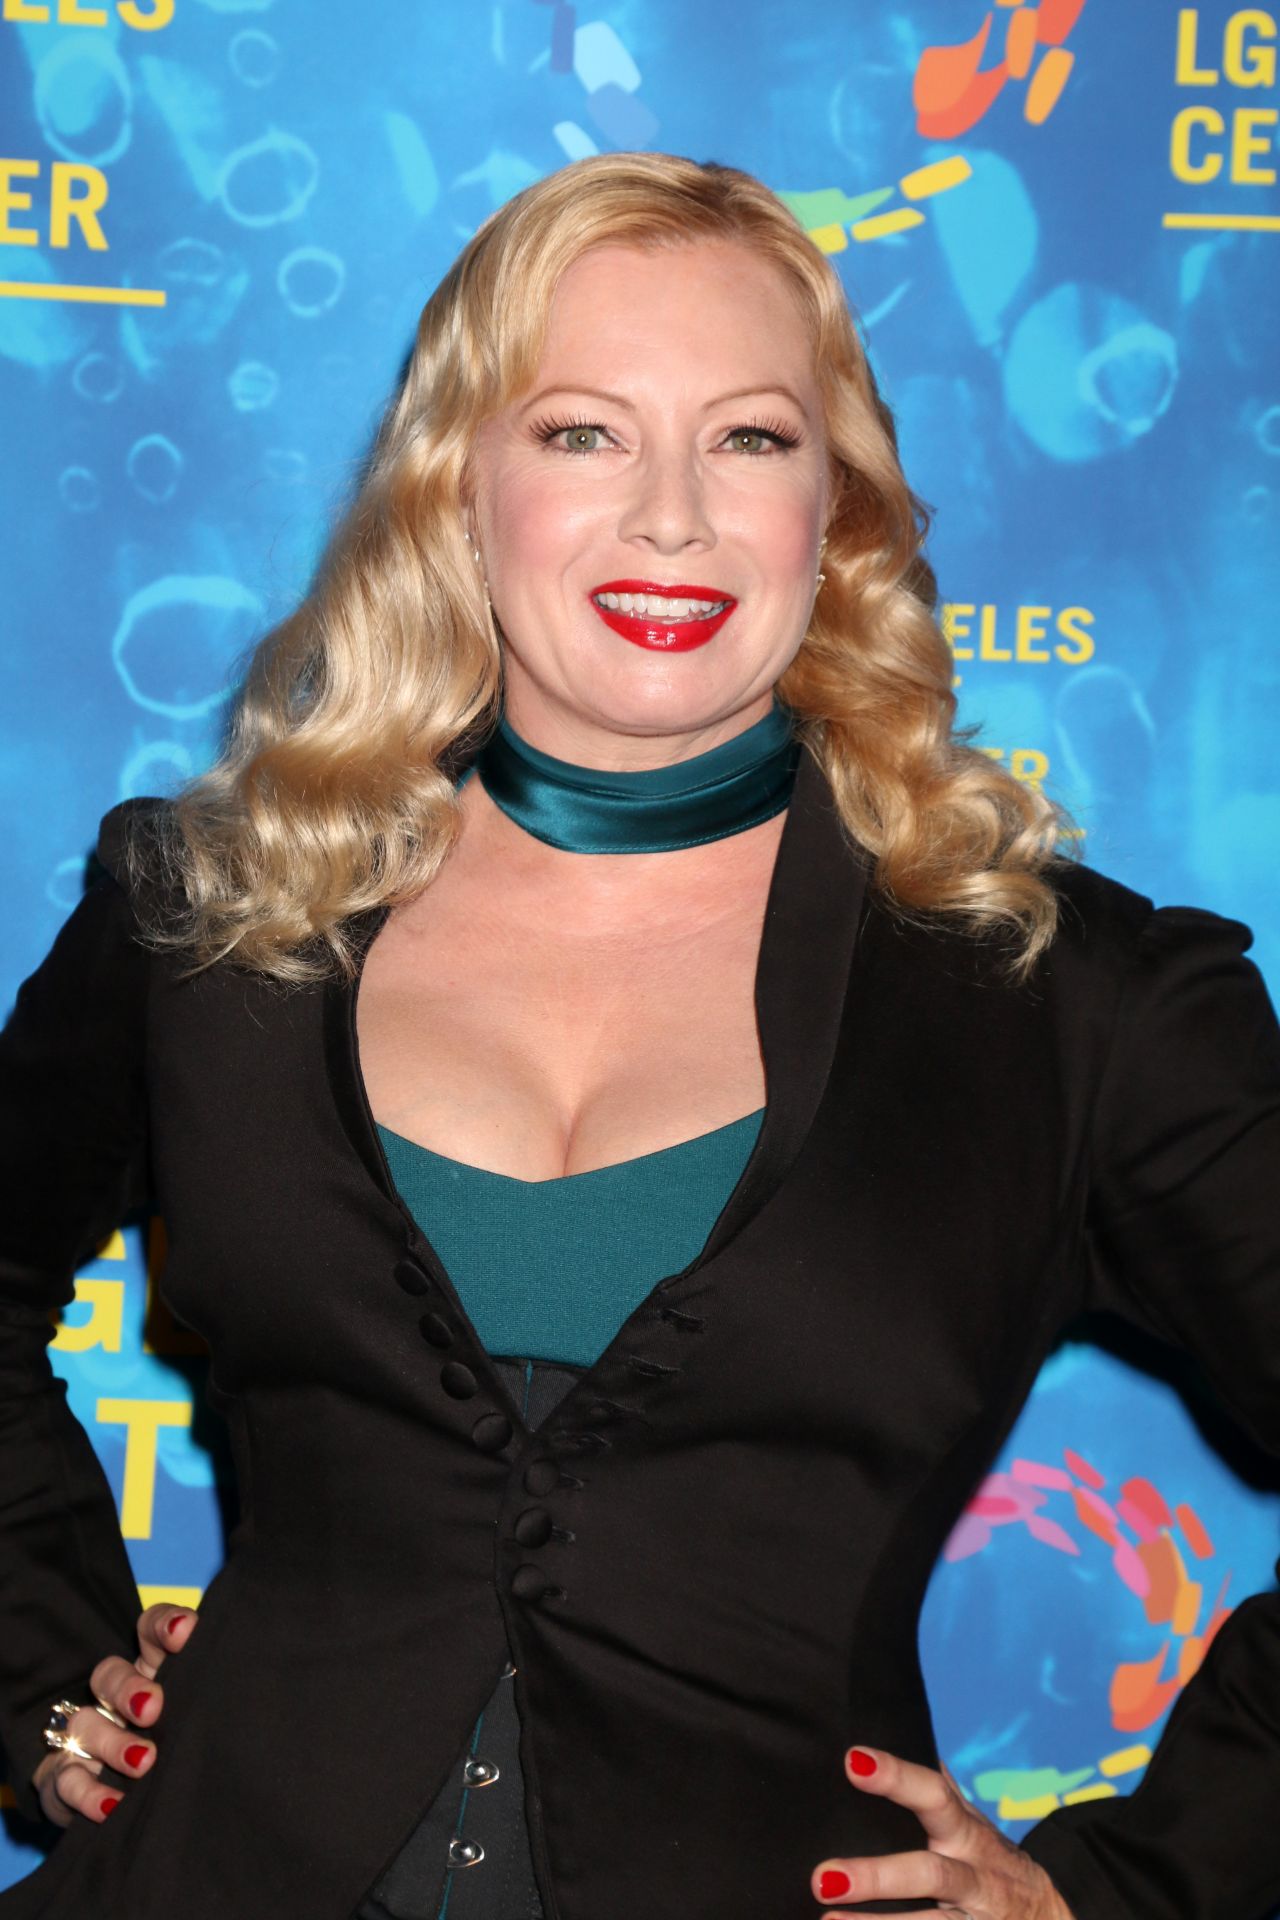 Traci Lords | Celebrities | Pinterest | Traci lords